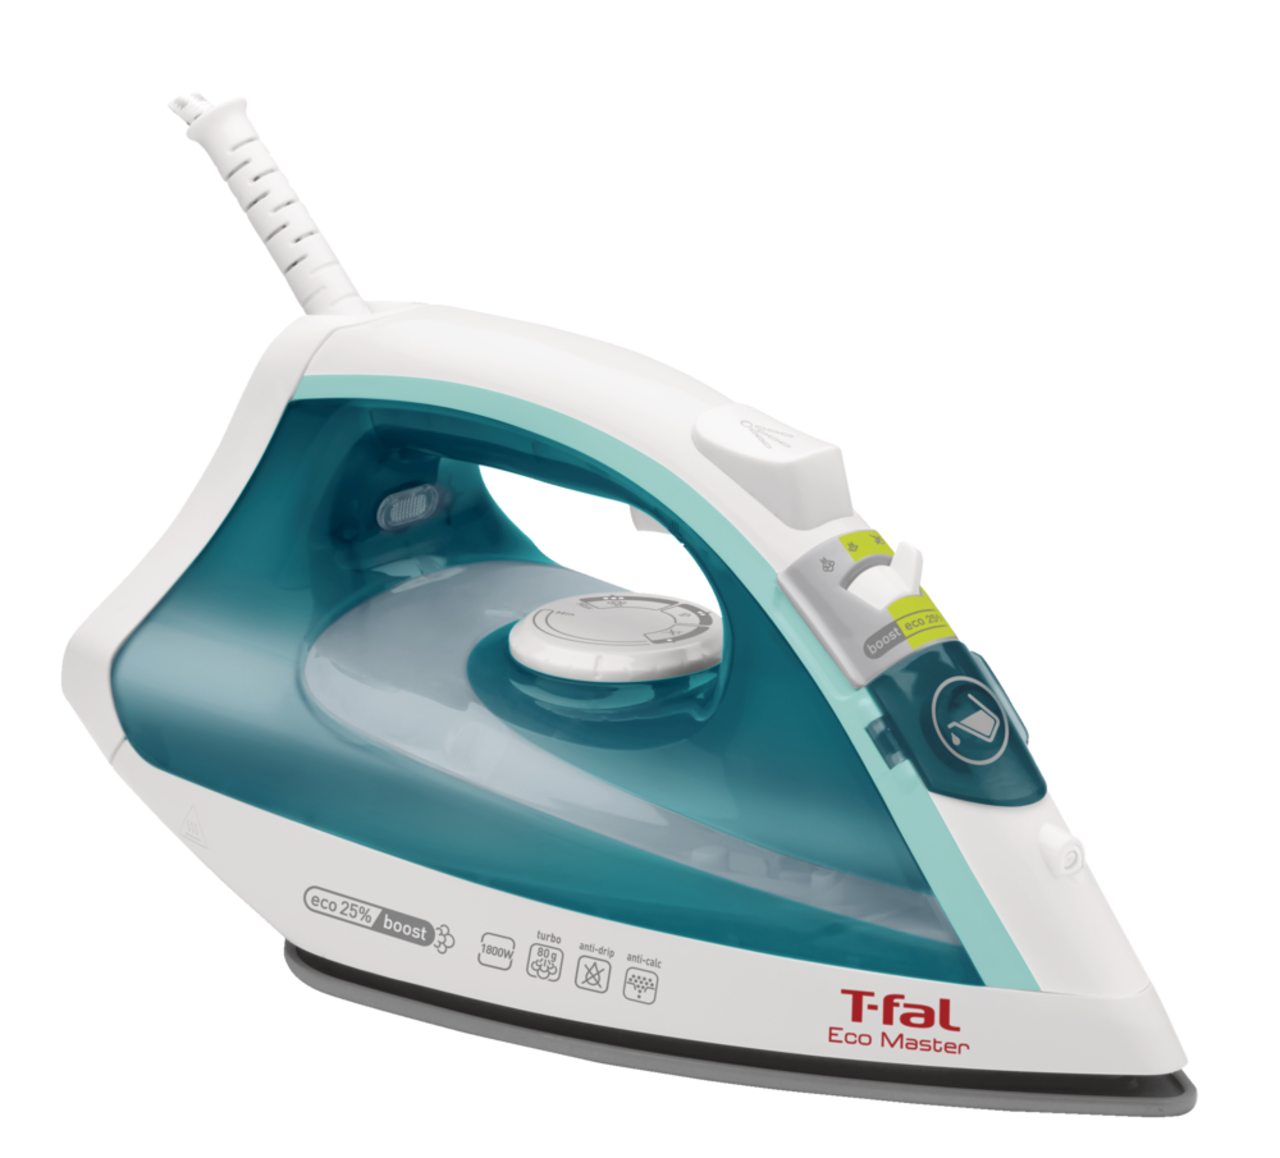 https://media-www.canadiantire.ca/product/living/personal-garment-care/garment-care/0432686/t-fal-ecomaster-iron-57d4af65-8d94-4131-a570-3baf21fe26d0.png?imdensity=1&imwidth=640&impolicy=mZoom